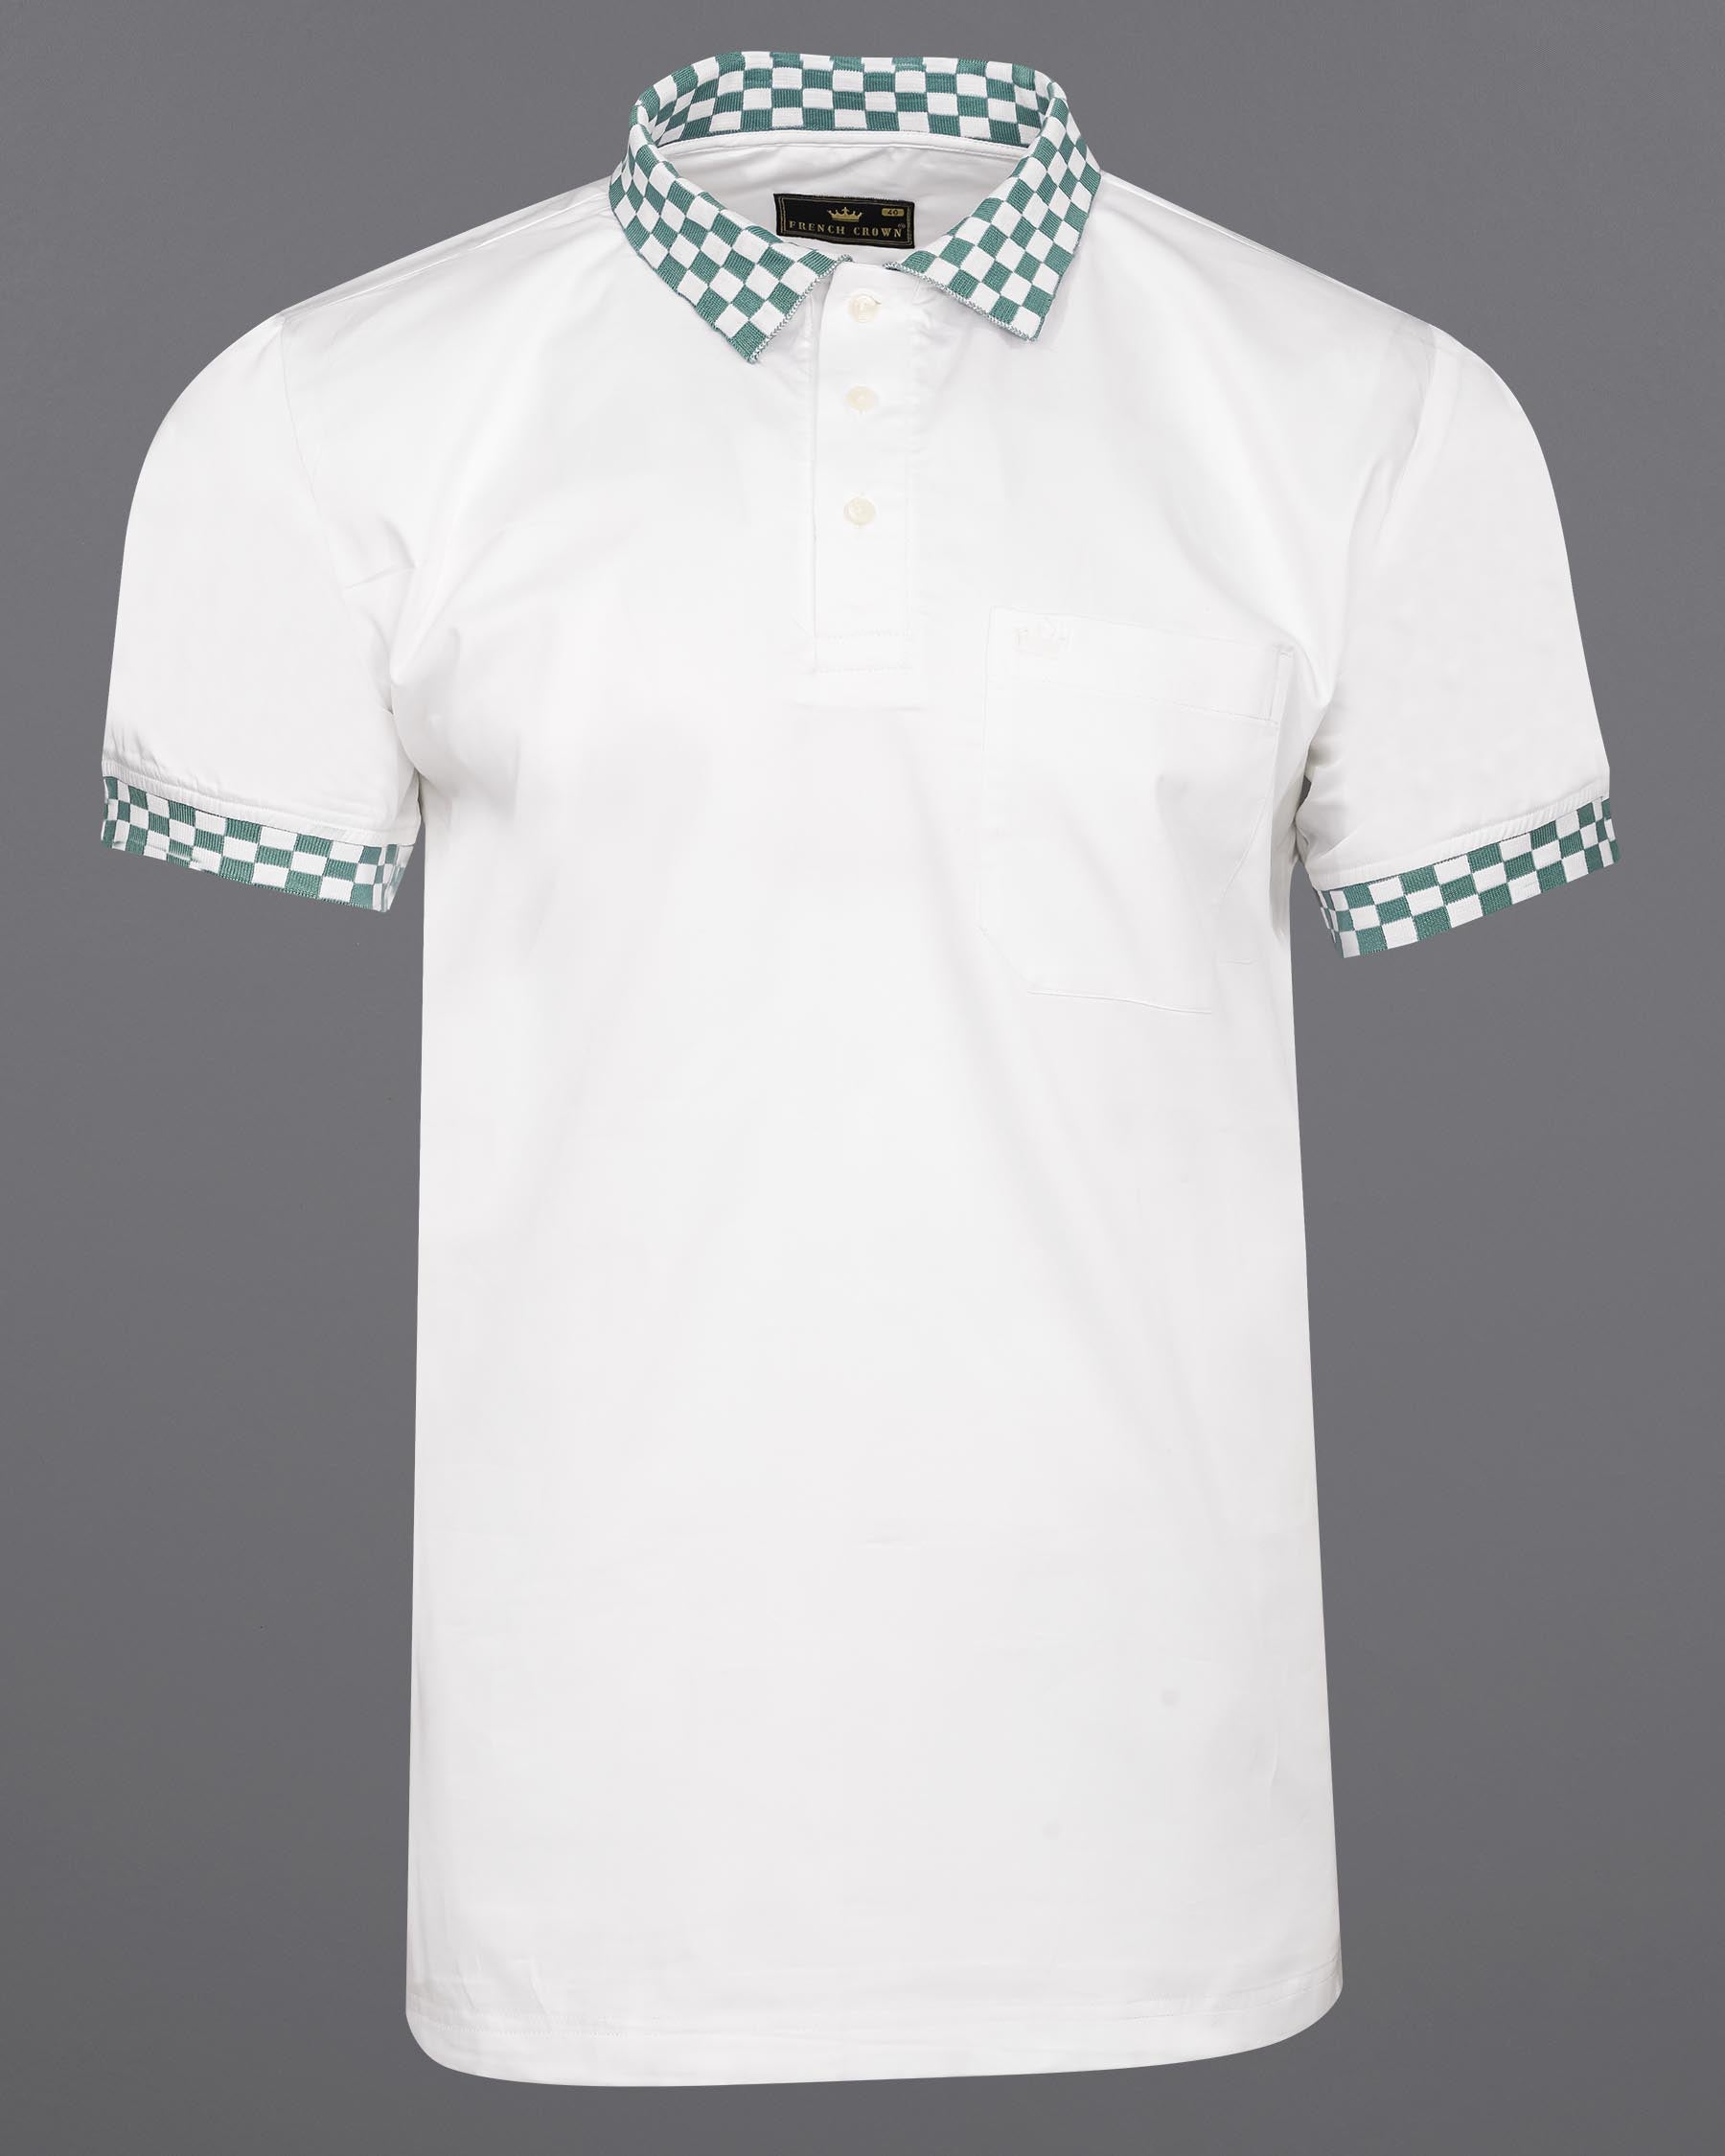 Bright White Checkered Collar and Sleeves Super Soft Premium Cotton Polo shirt 7228-P392-38, 7228-P392-H-38, 7228-P392-39, 7228-P392-H-39, 7228-P392-40, 7228-P392-H-40, 7228-P392-42, 7228-P392-H-42, 7228-P392-44, 7228-P392-H-44, 7228-P392-46, 7228-P392-H-46, 7228-P392-48, 7228-P392-H-48, 7228-P392-50, 7228-P392-H-50, 7228-P392-52, 7228-P392-H-52